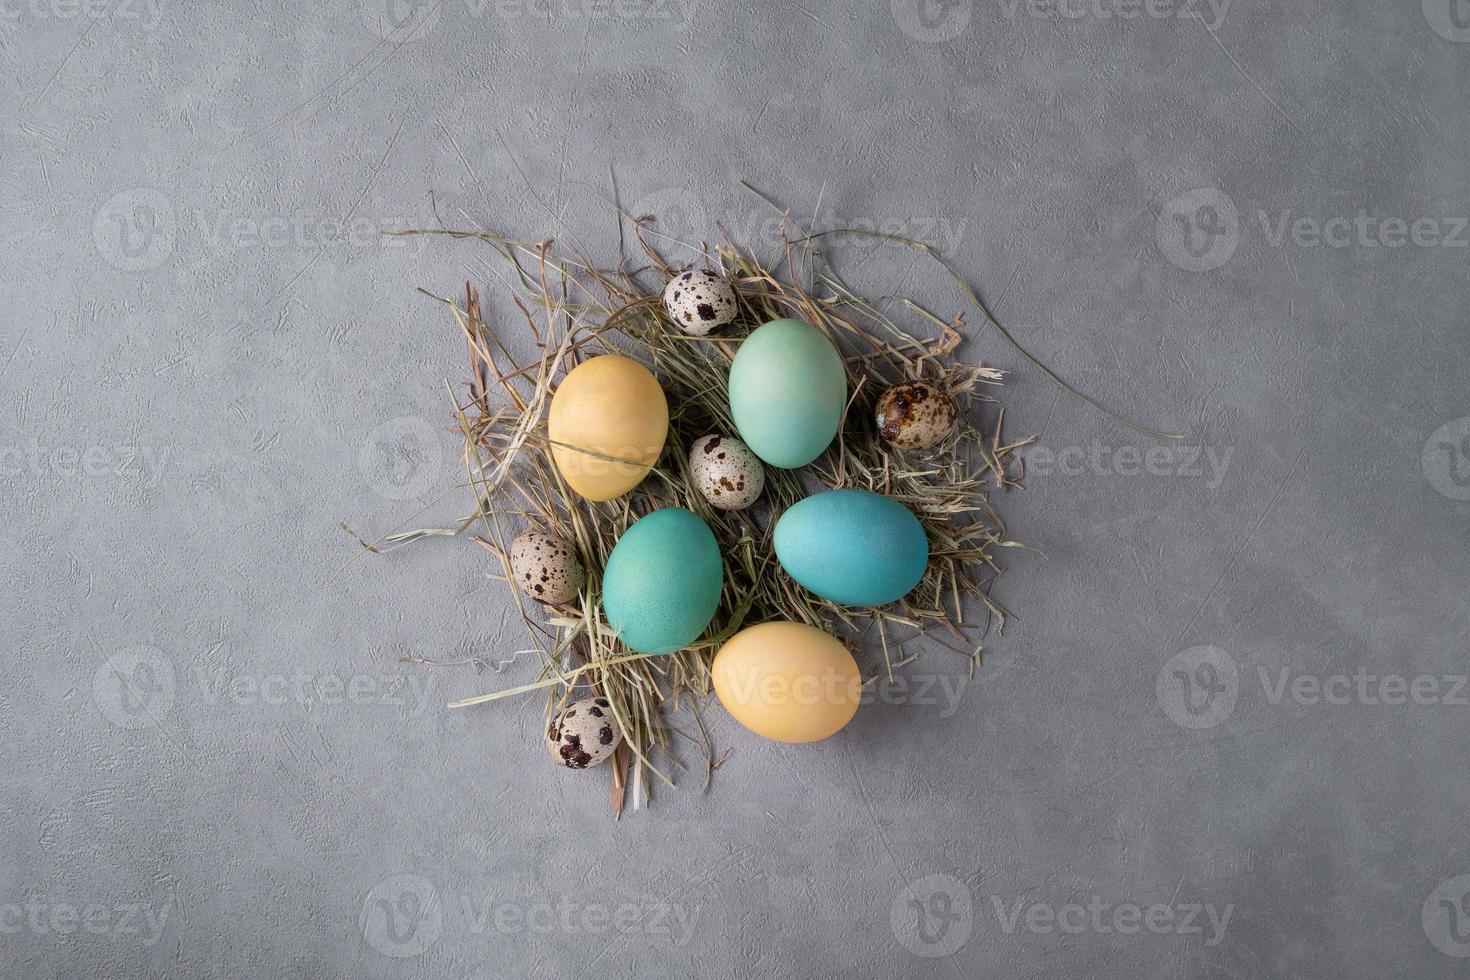 Stylized bird's nest with quail and painted yellow and turquoise chicken eggs photo